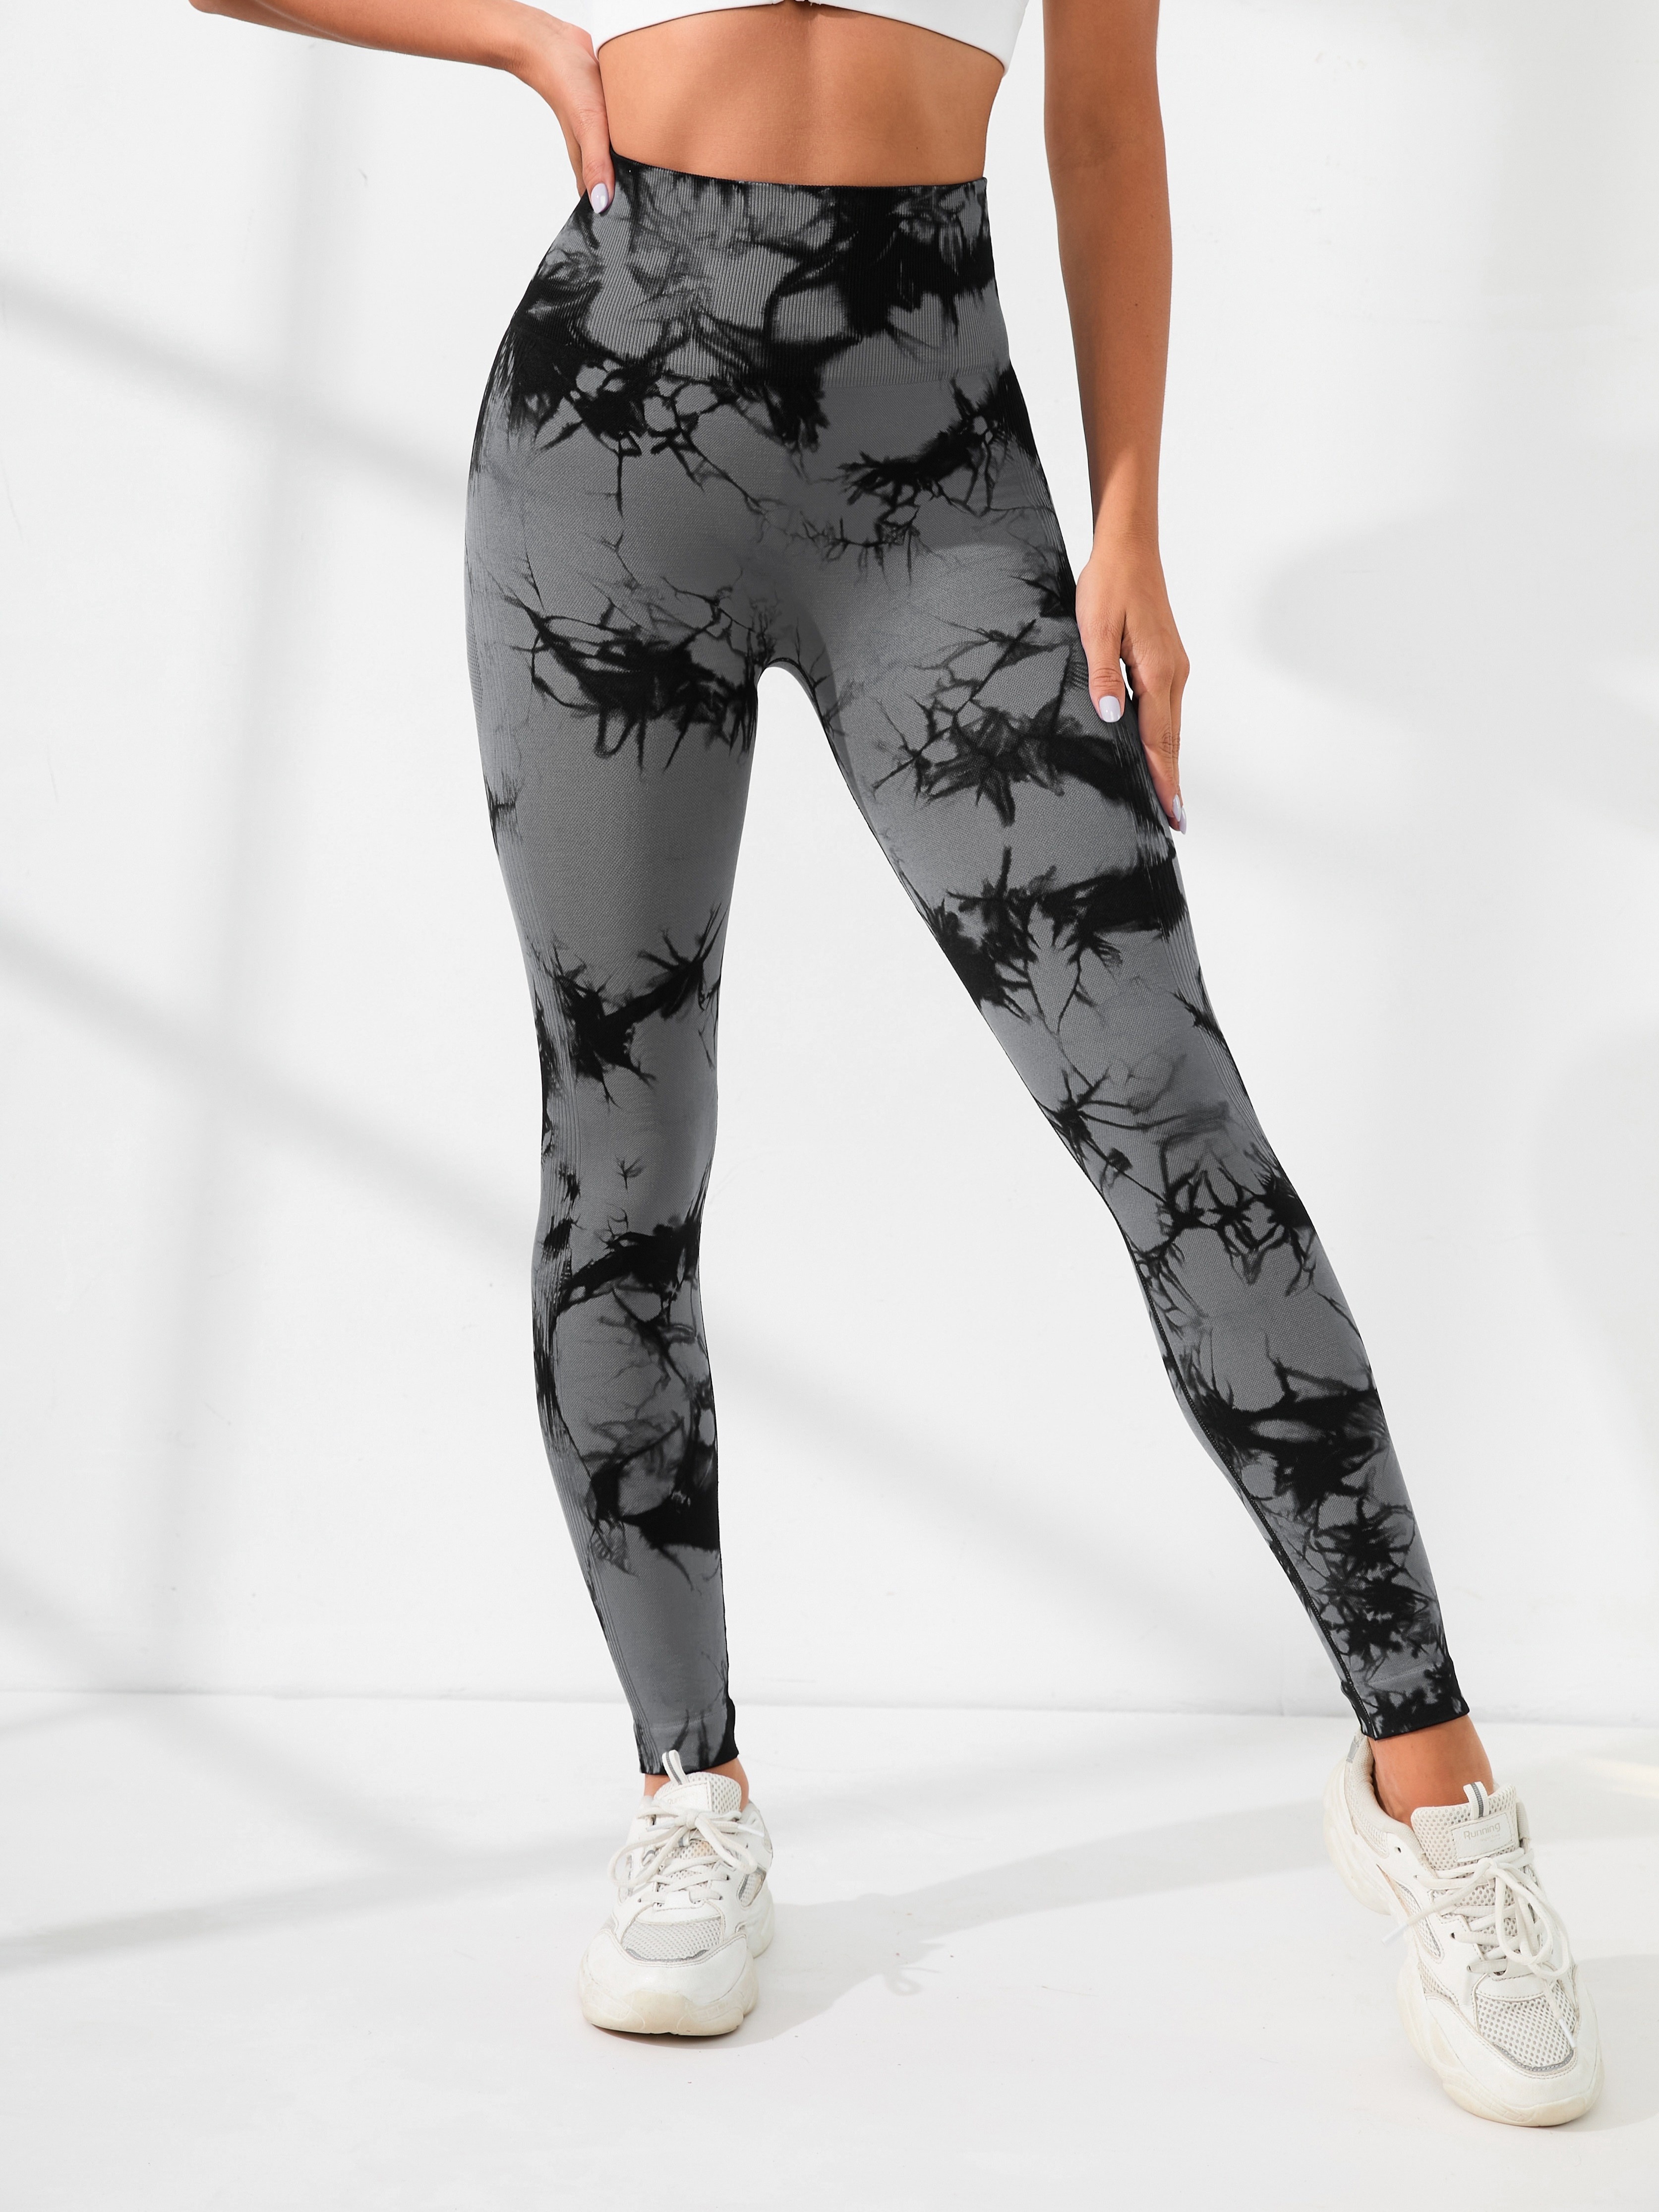 Black Camo Leggings for Women Womens Black Leggings With Camouflage Print  Non See Through Squat Approved Perfect for Yoga, Gym, Running 